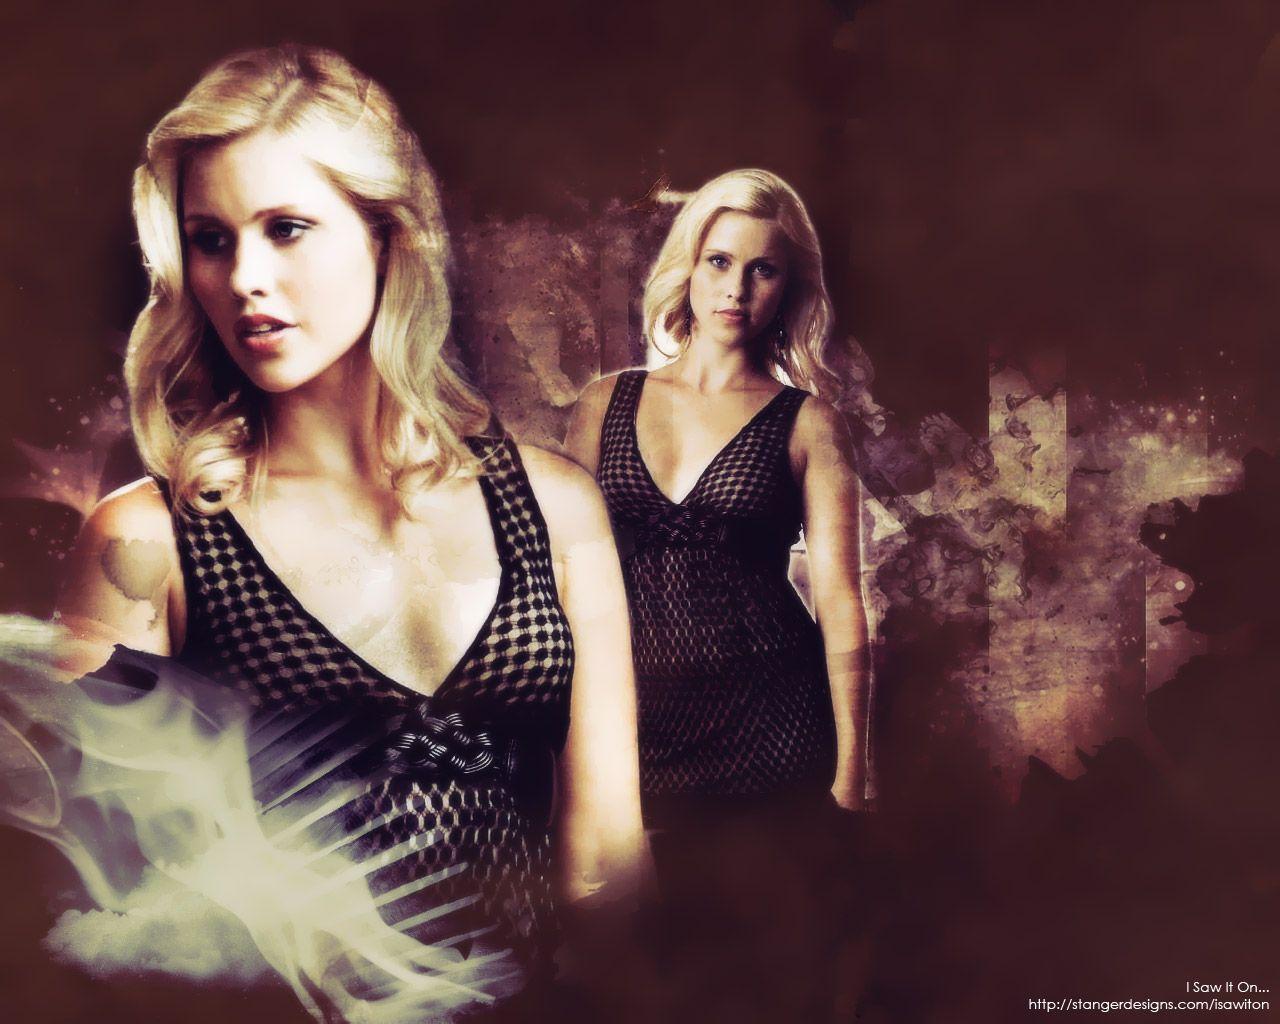 I finally got around to making a wallpaper featuring Claire Holt